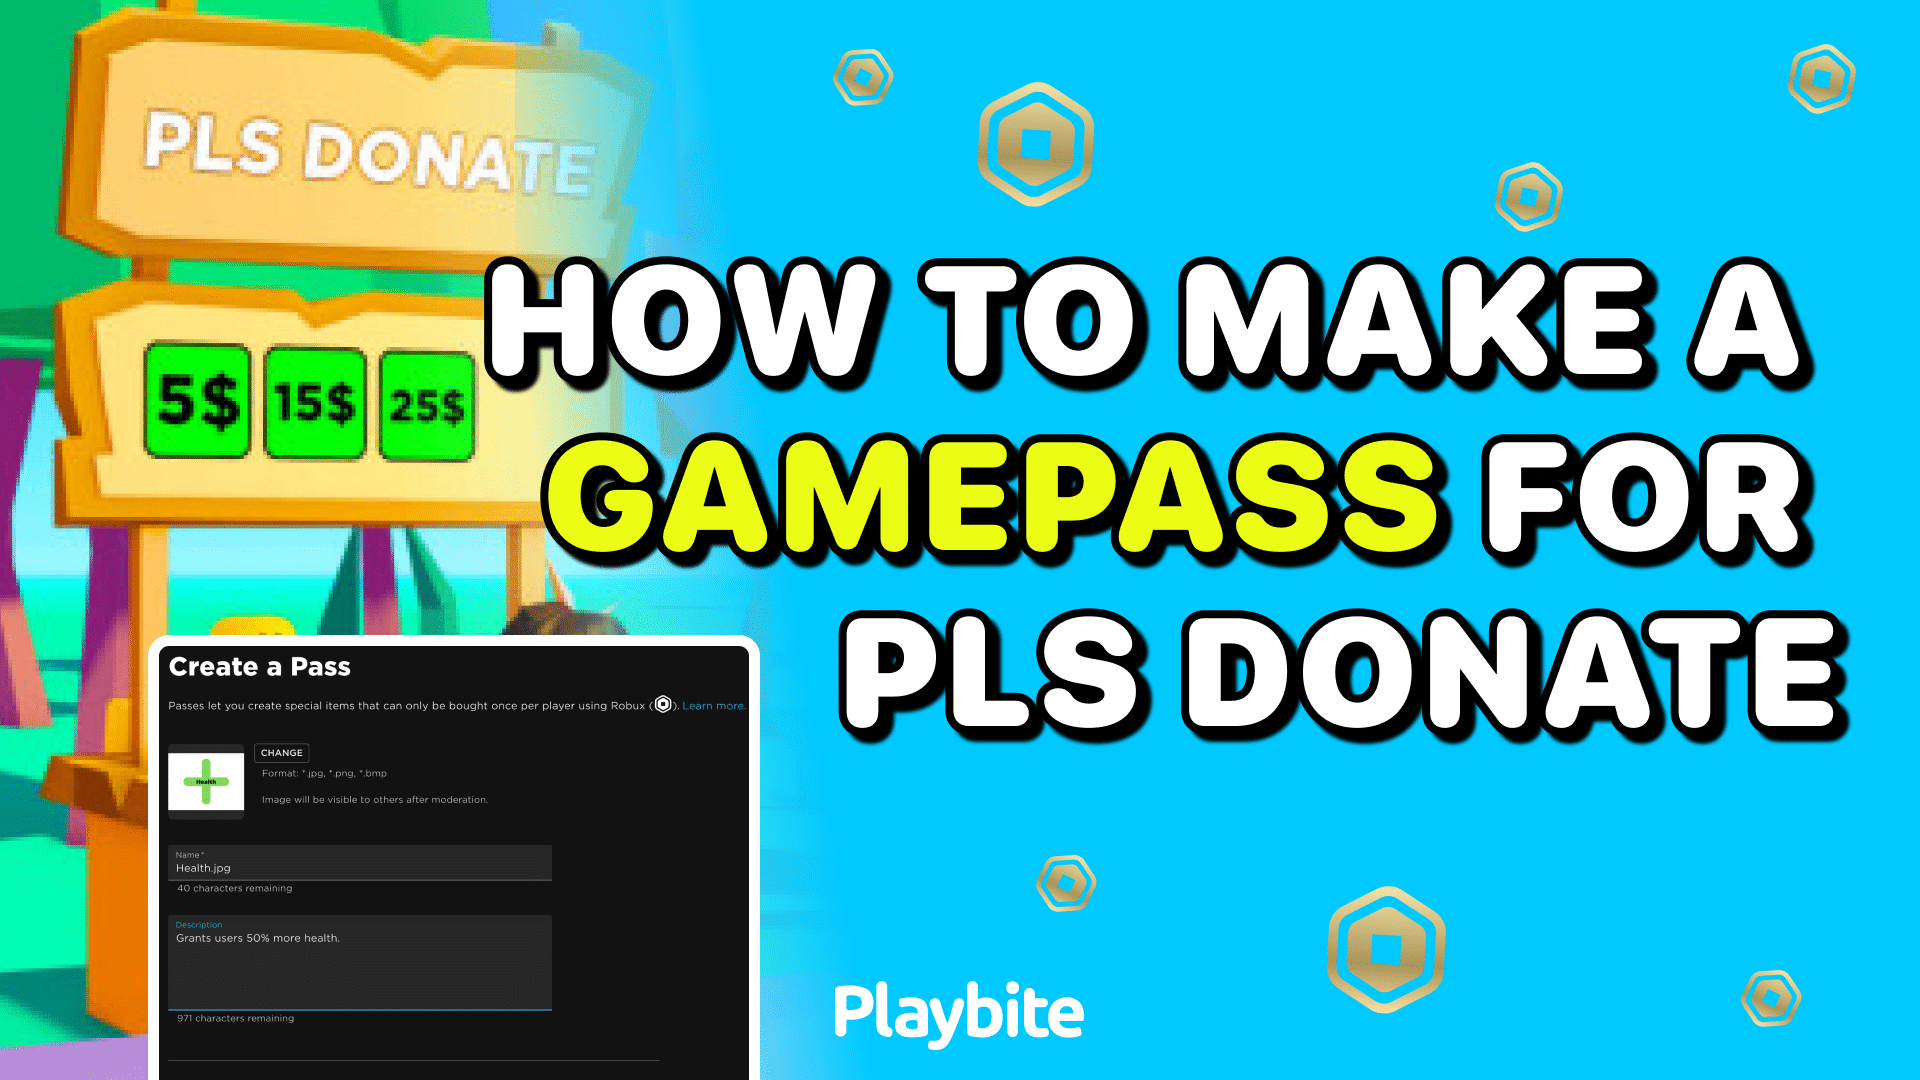 How to Create a Gamepass in Roblox